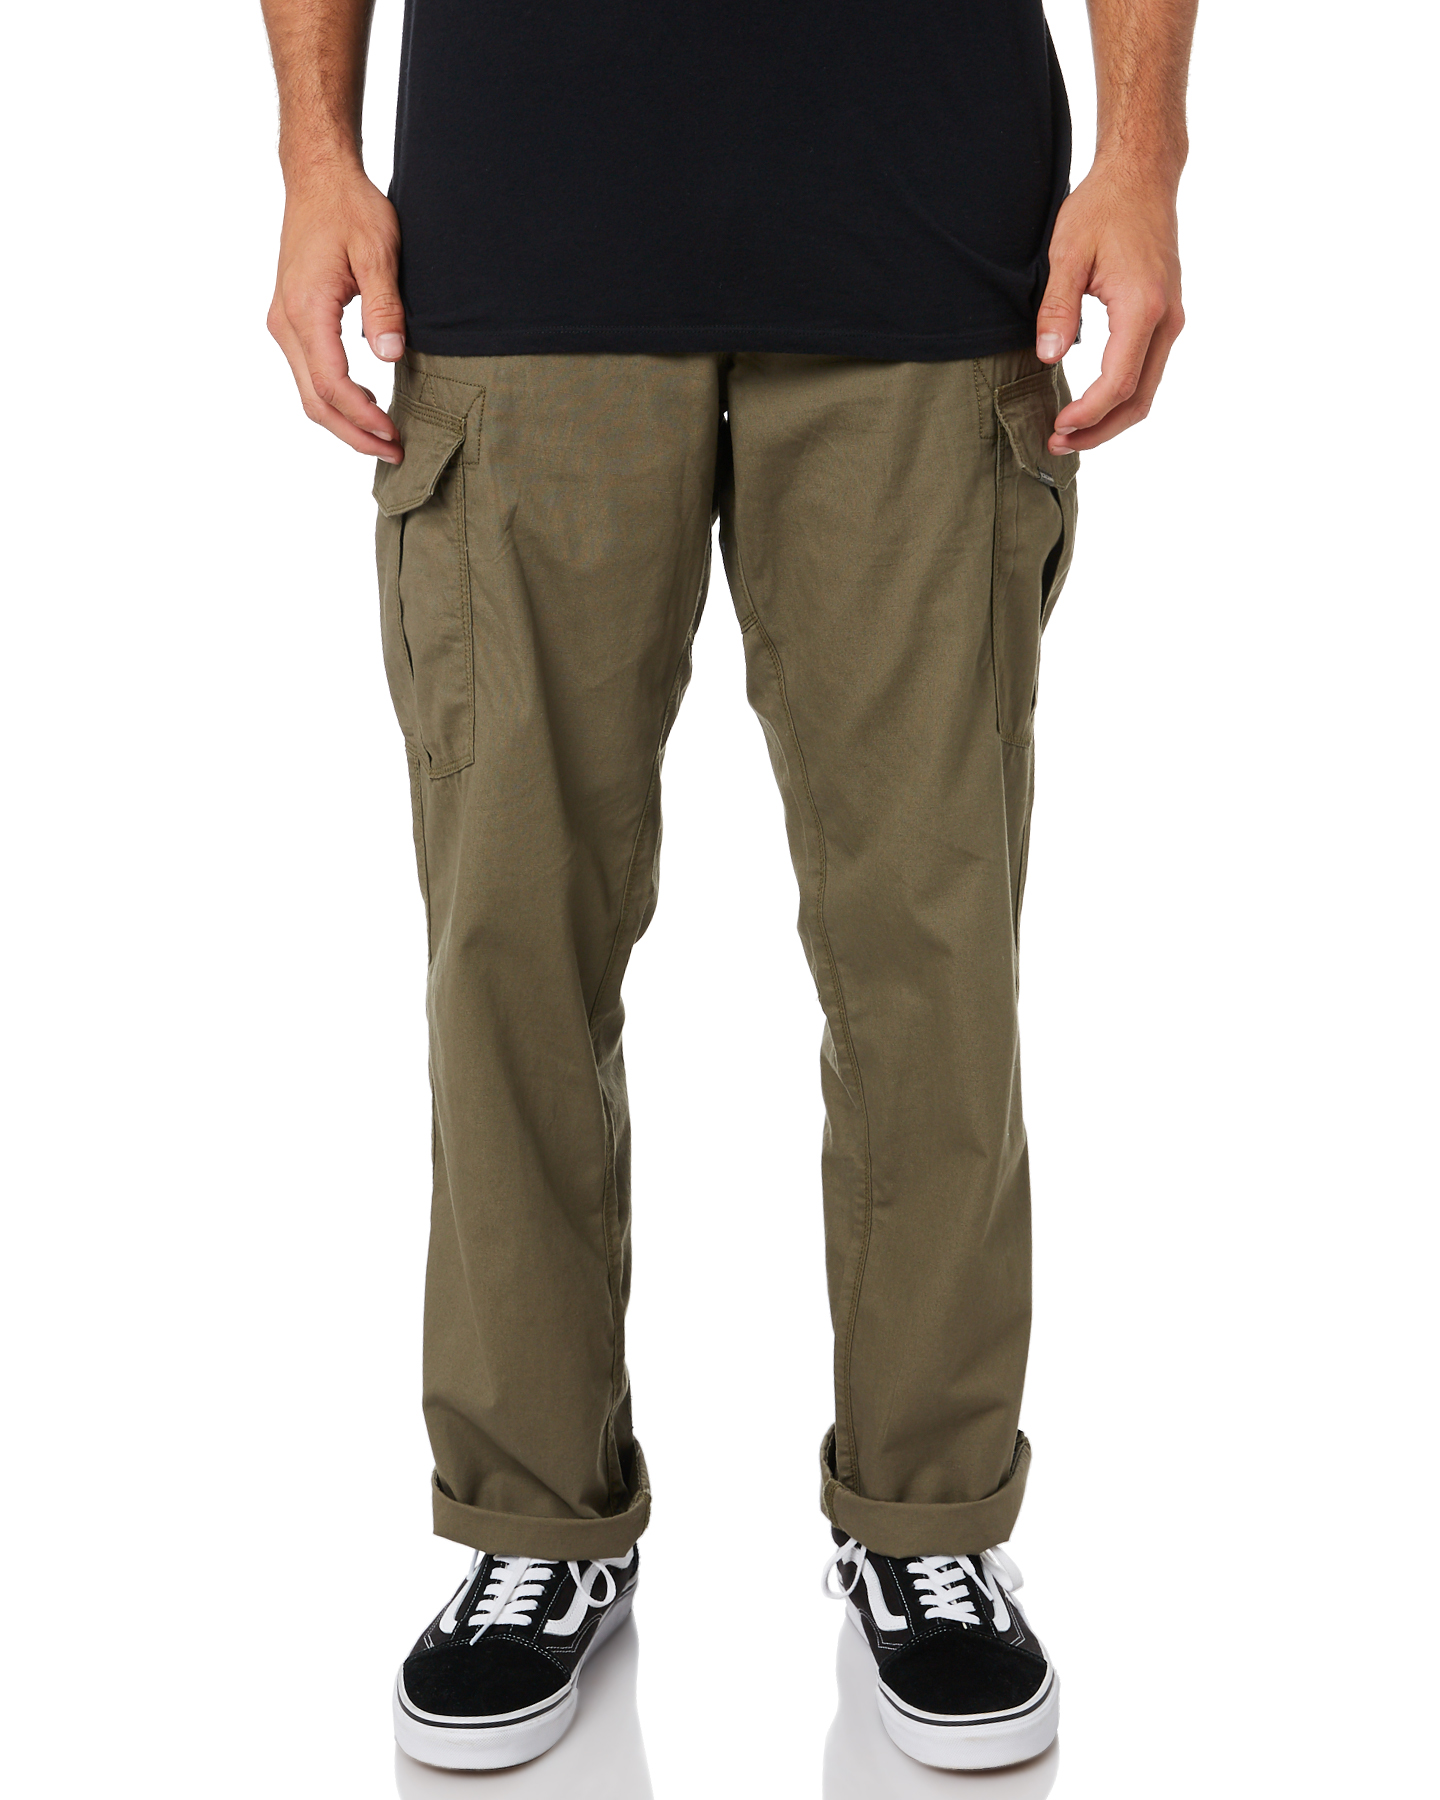 Volcom Miter Ii Mens Cargo Pant - Army Green Combo | SurfStitch